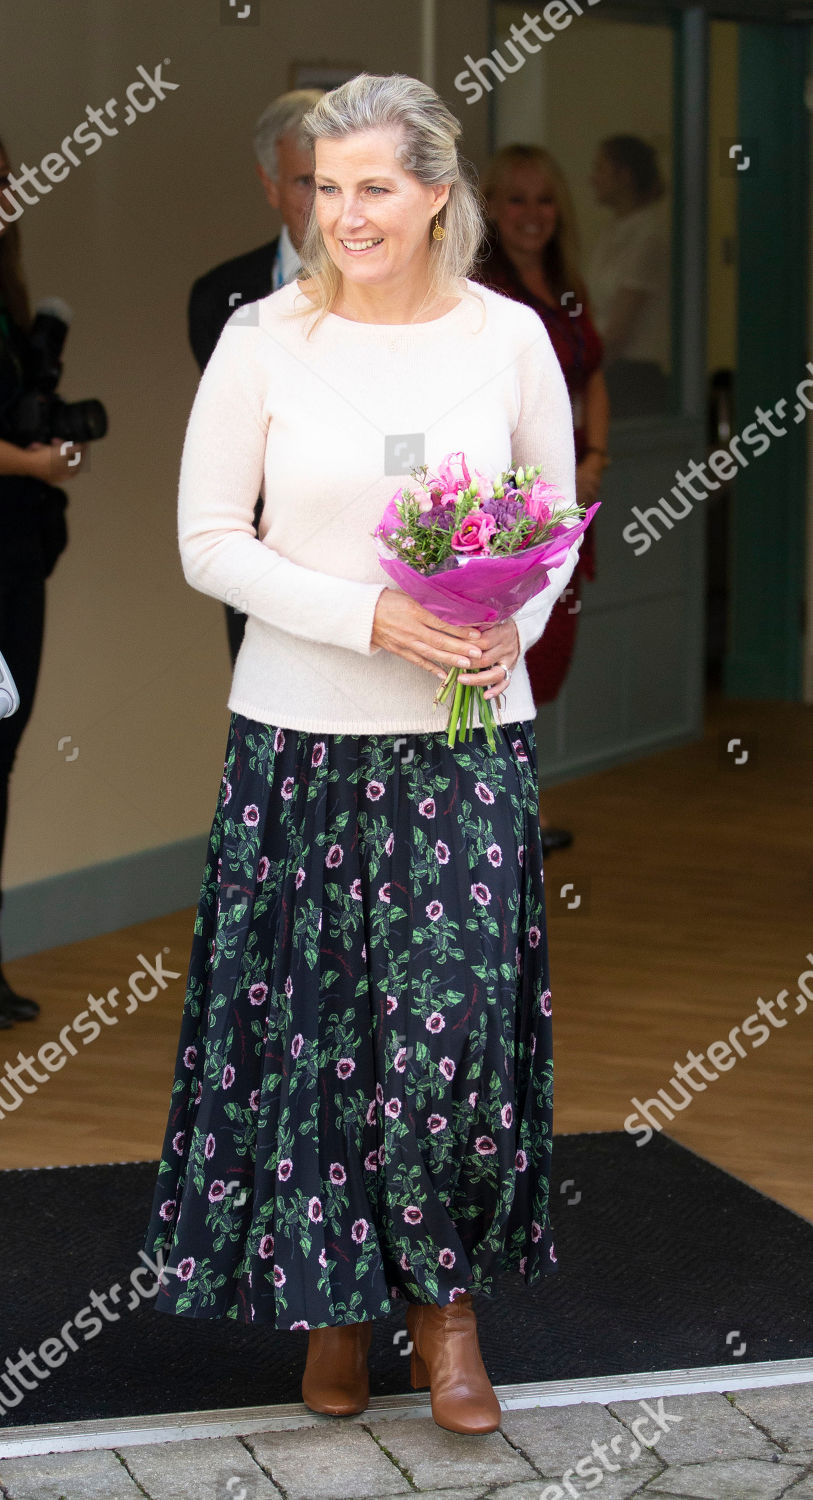 sophie-countess-of-wessex-visit-to-musgrove-park-hospital-taunton-somerset-uk-shutterstock-editorial-10422506ao.jpg